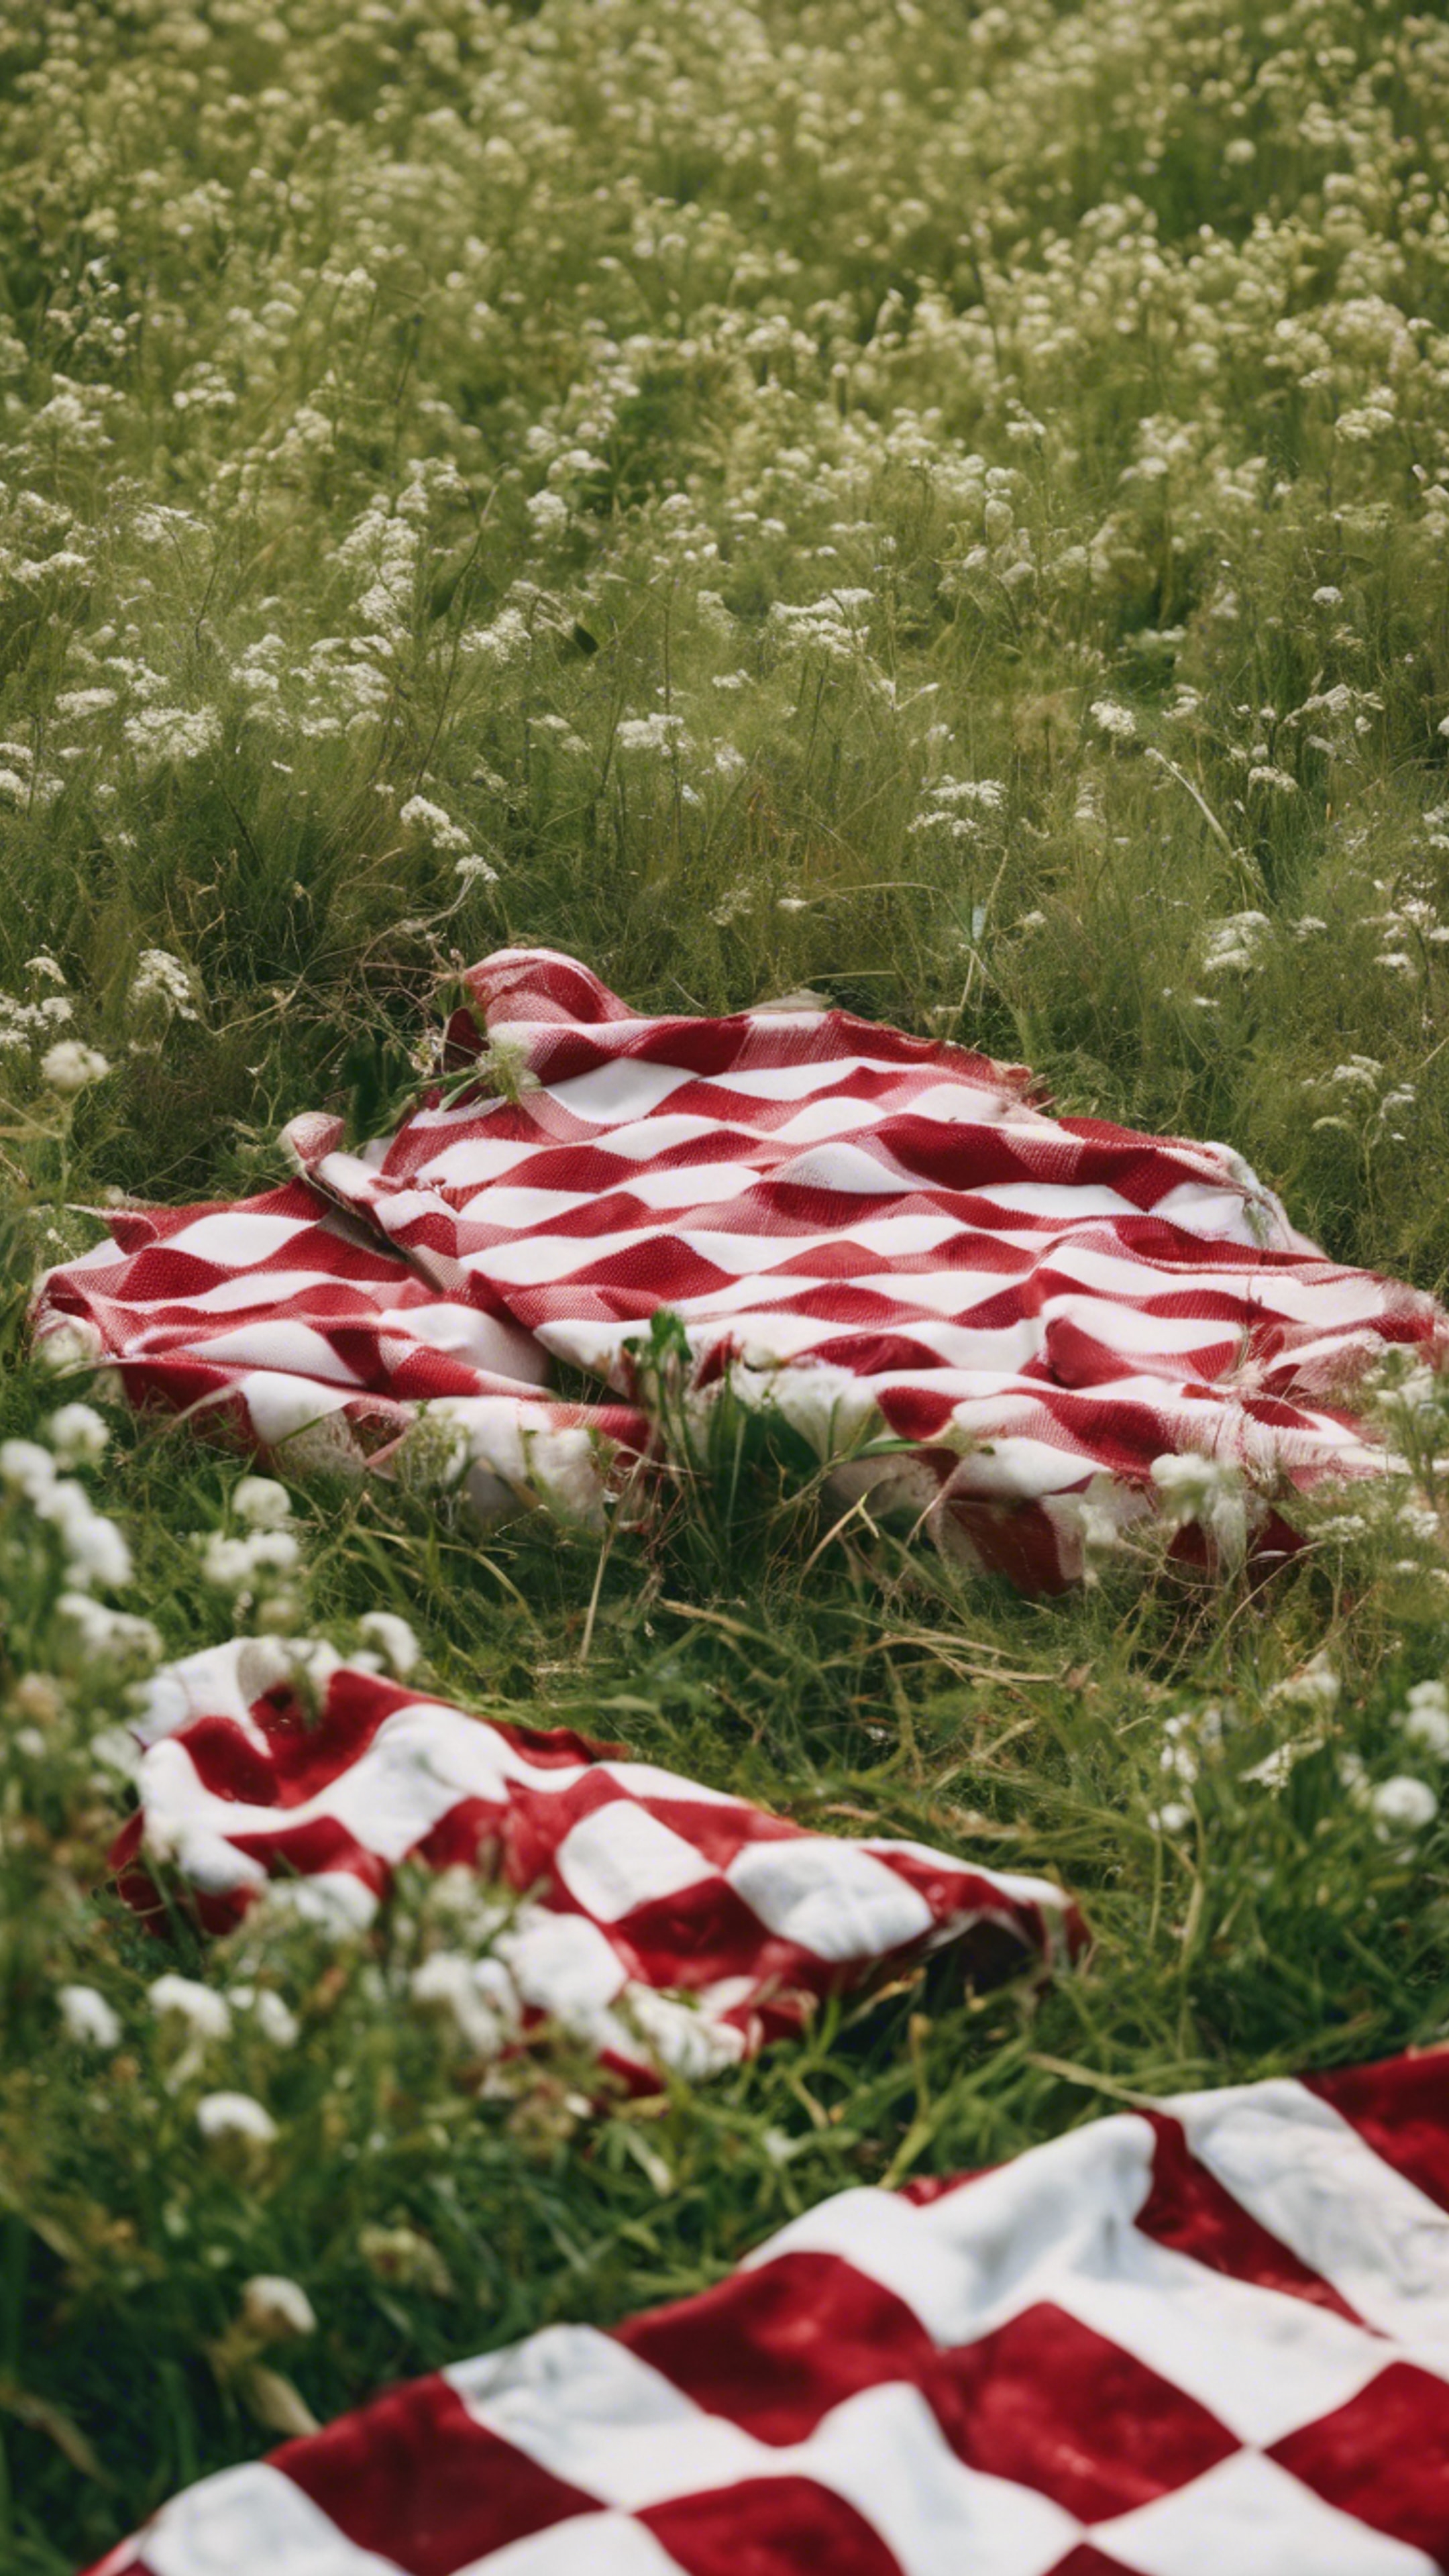 A red and white checkered picnic blanket spread out in a lush green field. Tapet[d3f97e971ed8445aa31d]